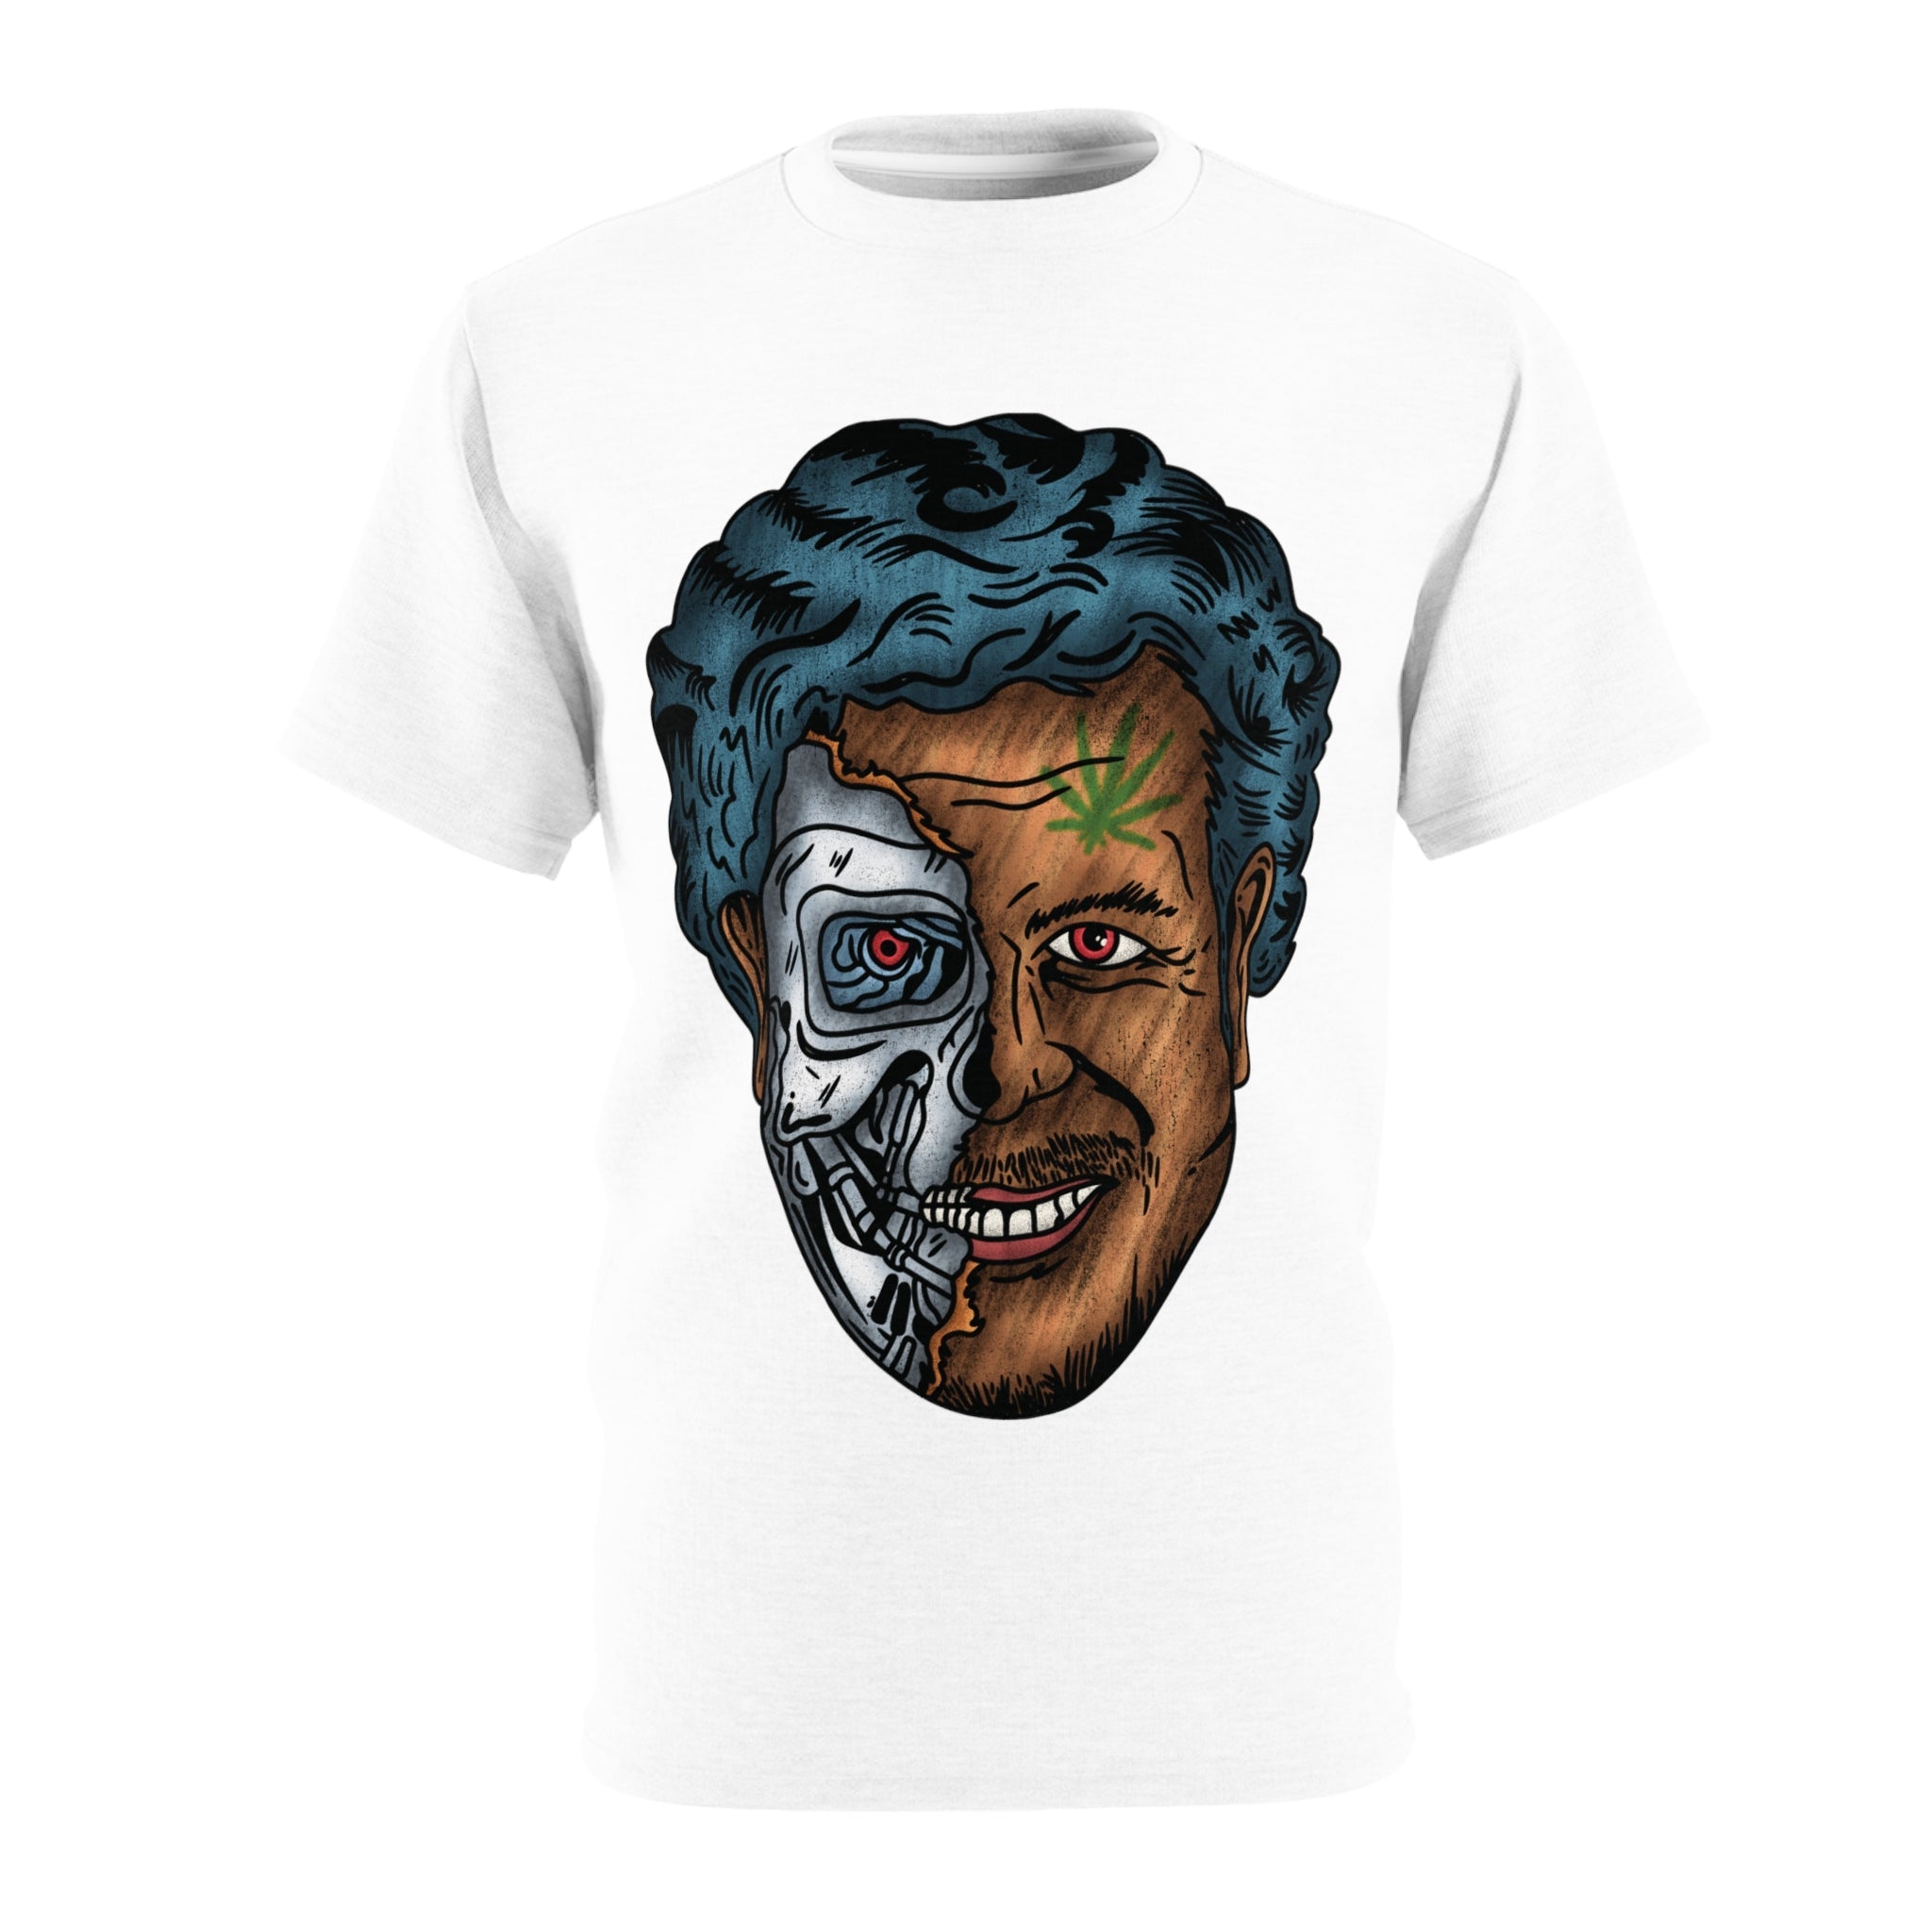 LIVE FOR FREEDOM Pablo Escobar Graphic Tee - TRU2 Clothing